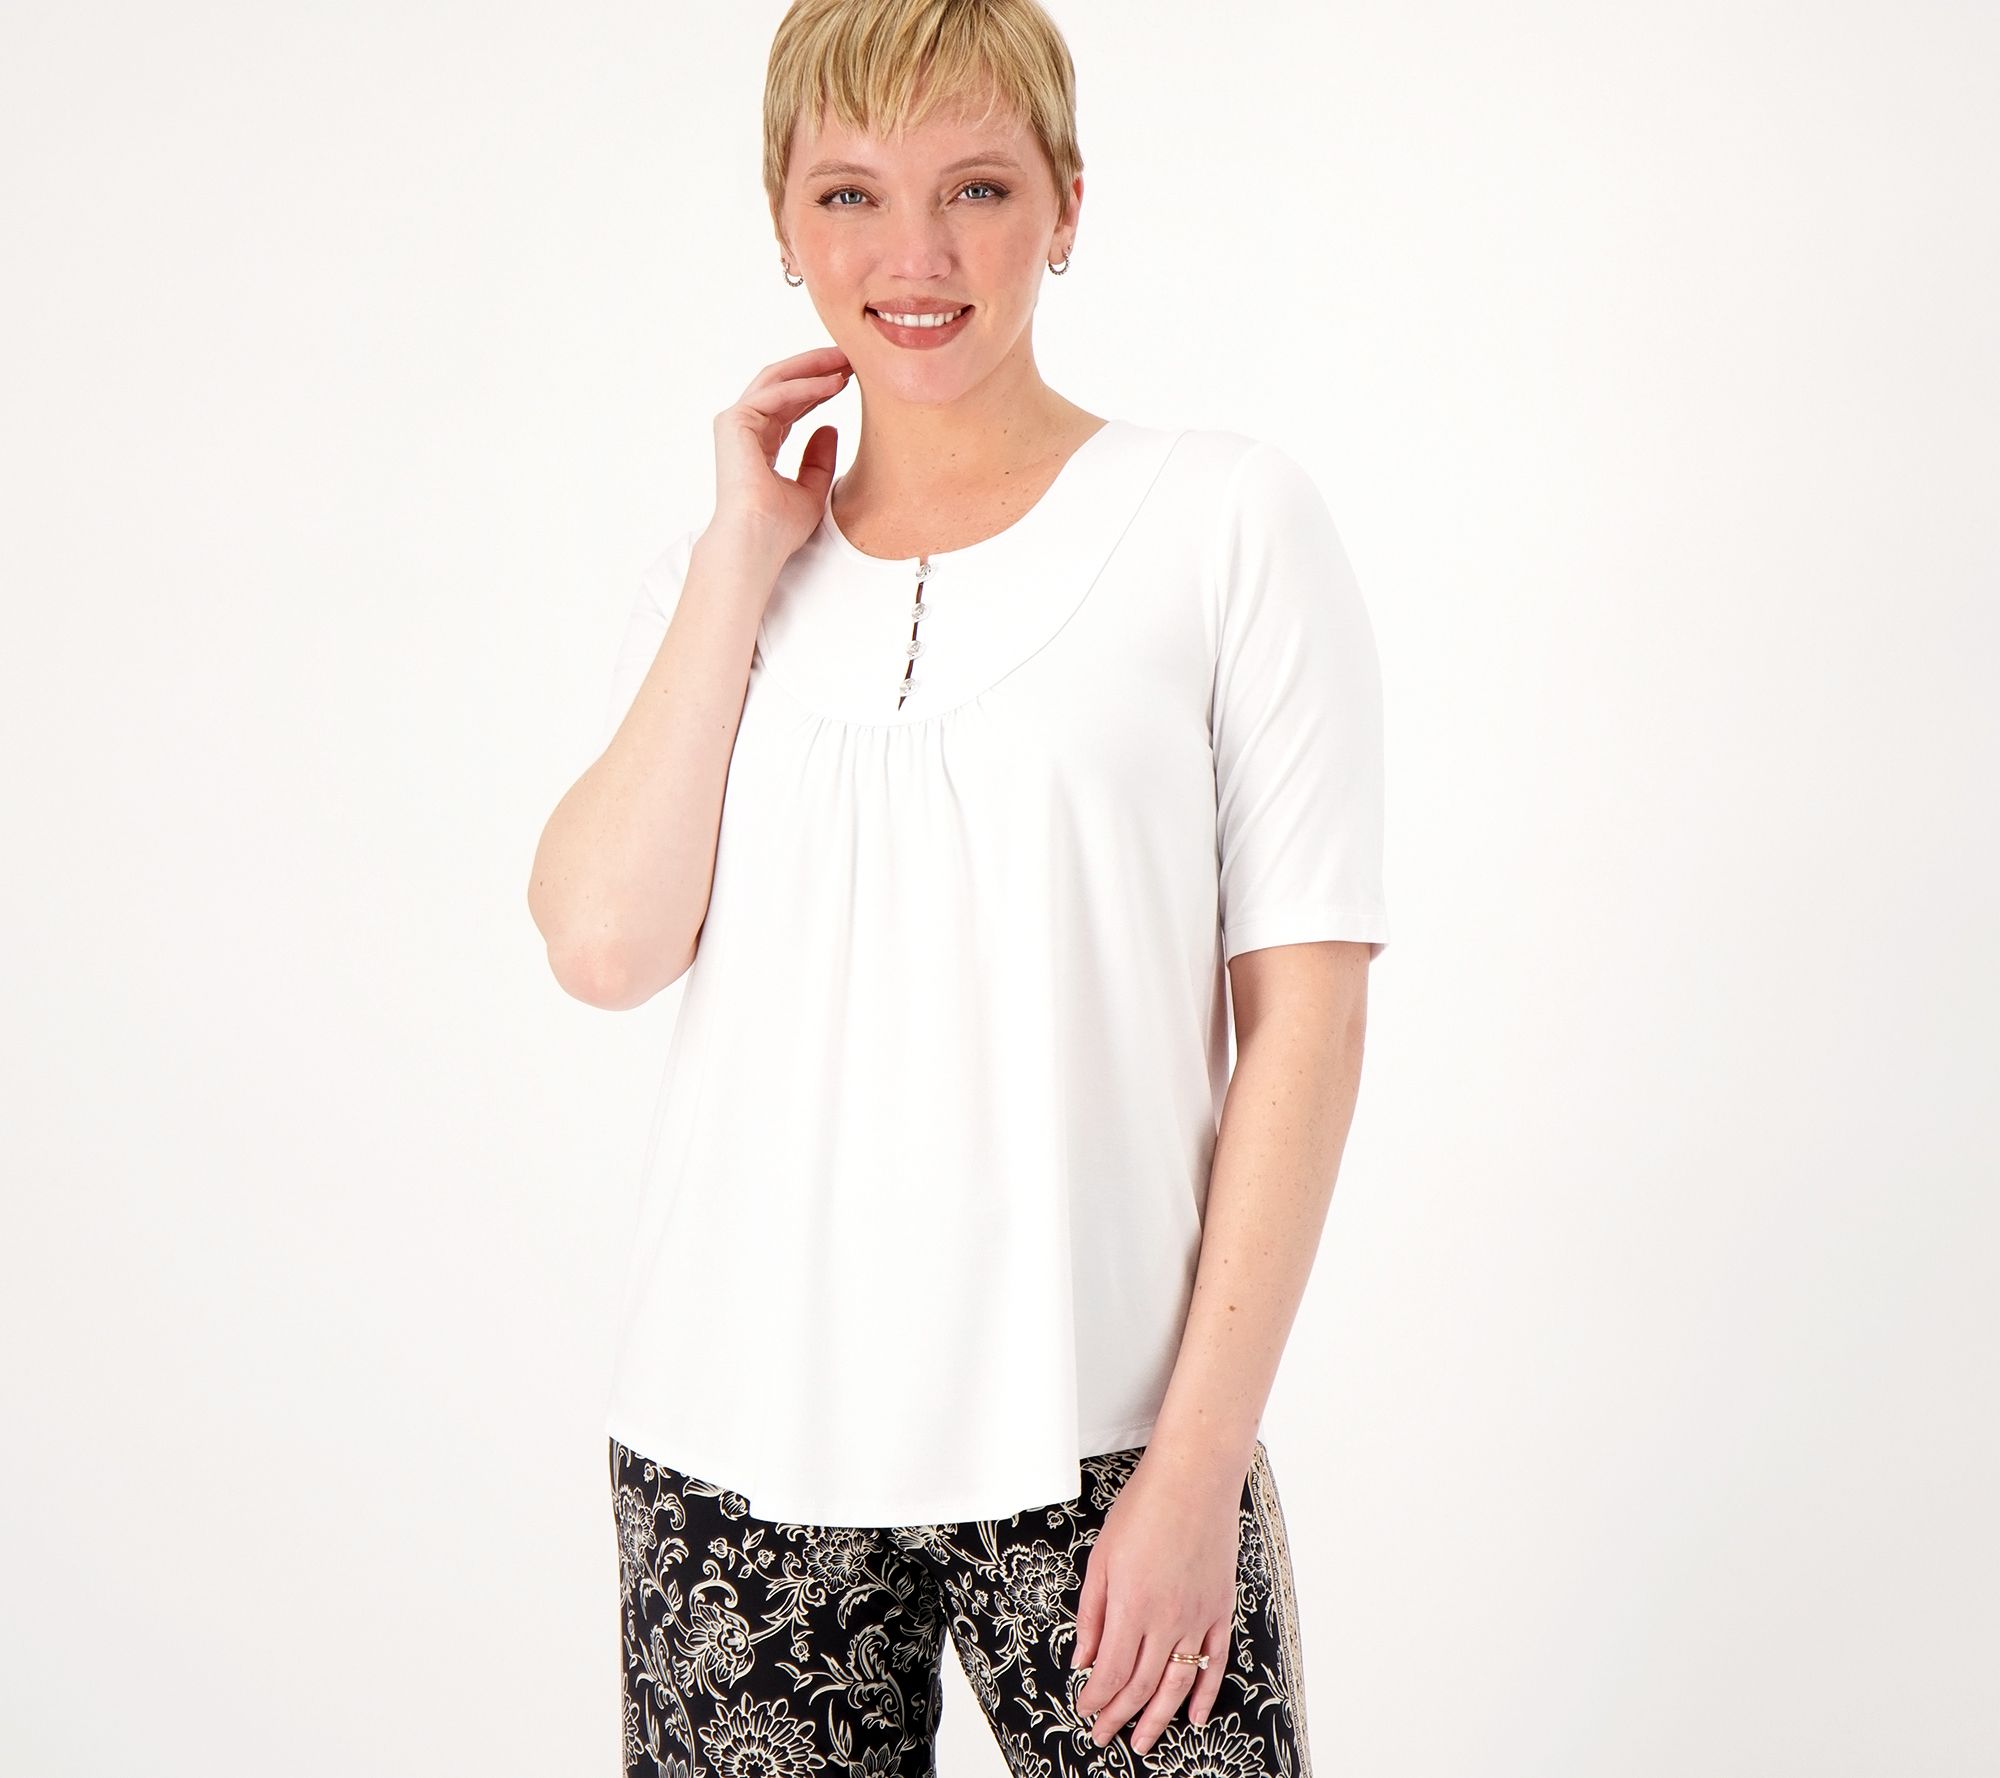 Susan Graver SG Sport Thermal Knit Top with Thumbhole Detail - QVC.com